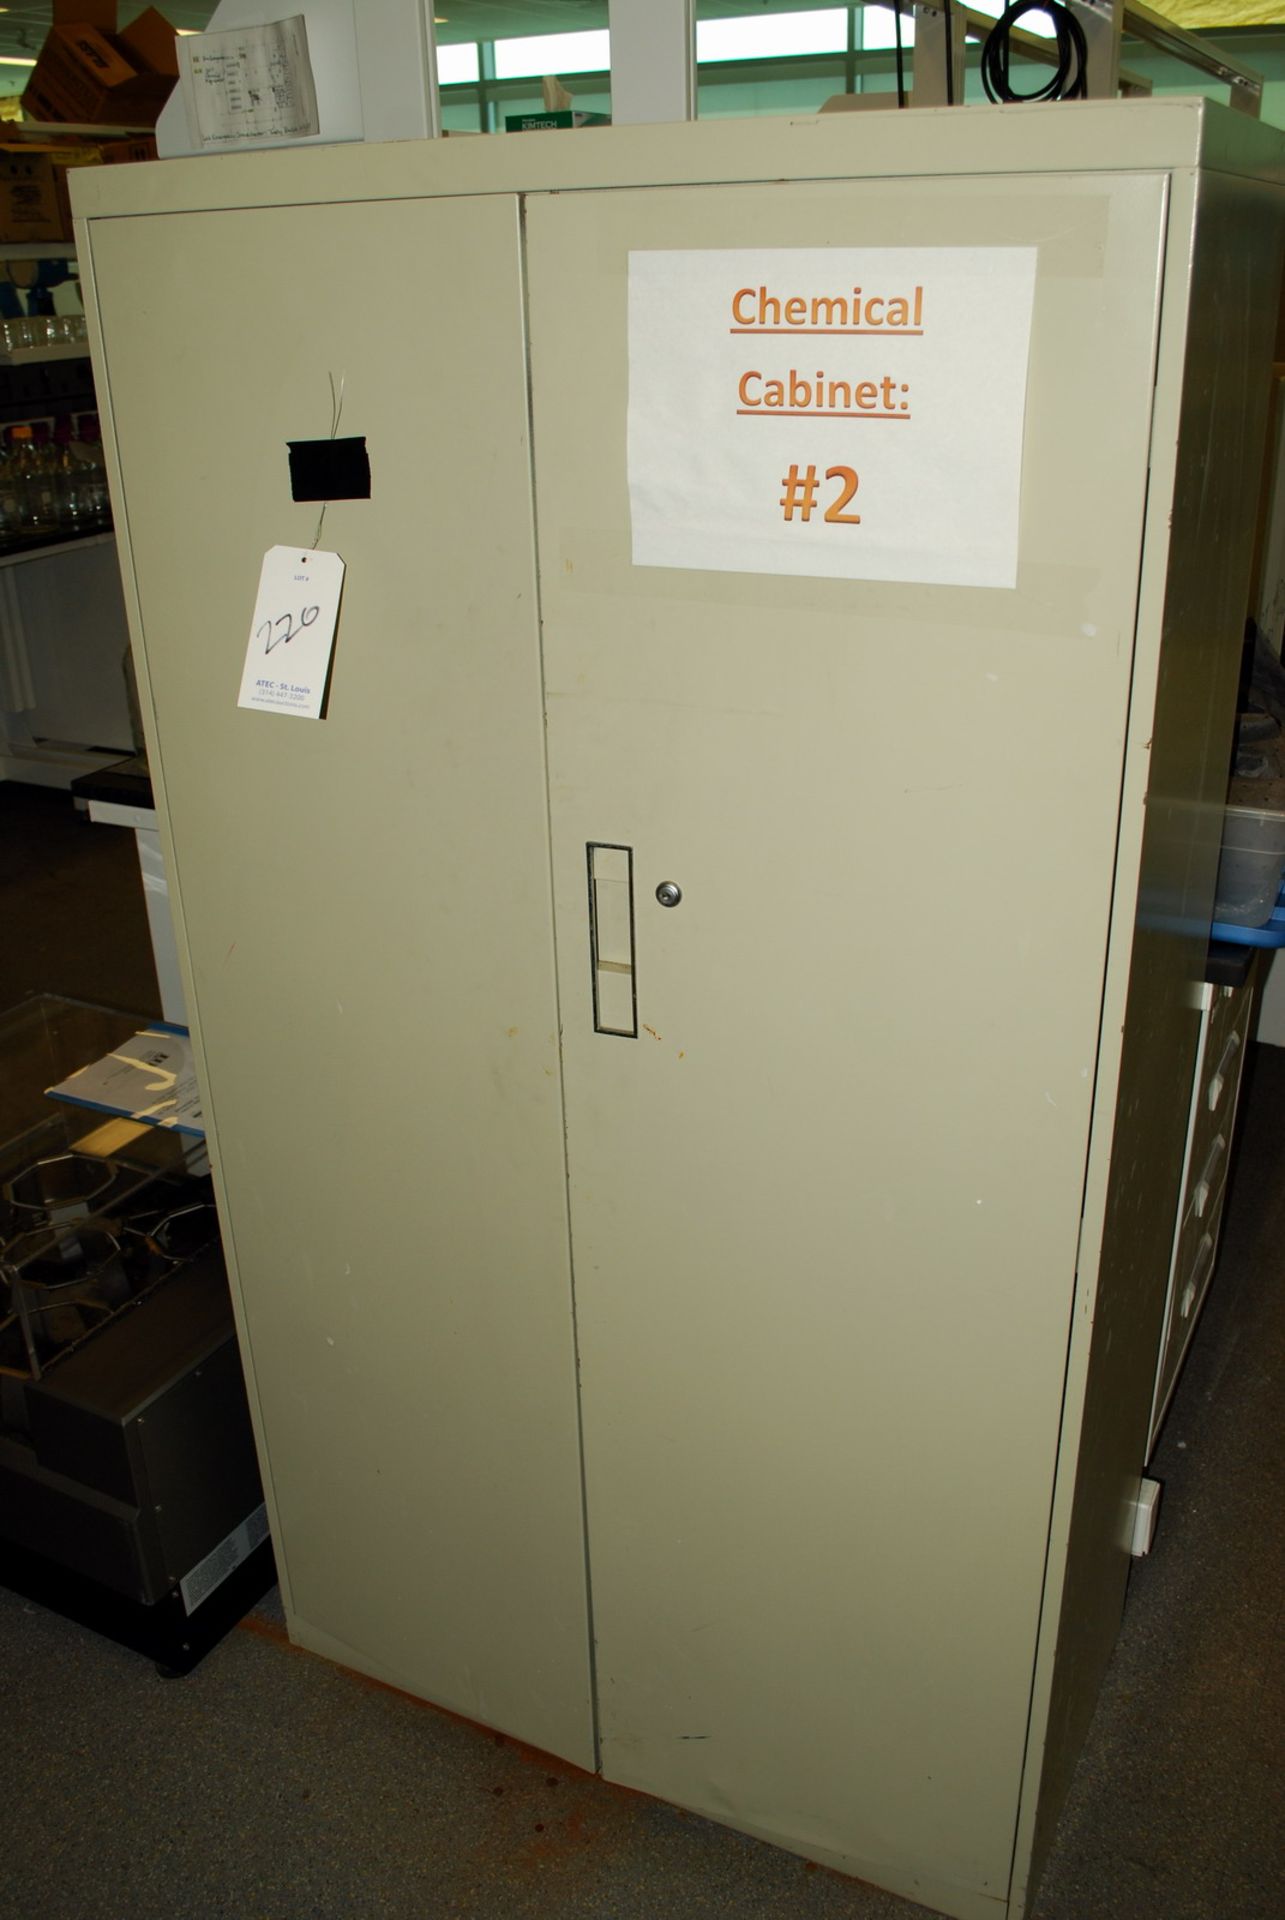 Chemical Cabinet - Image 2 of 2